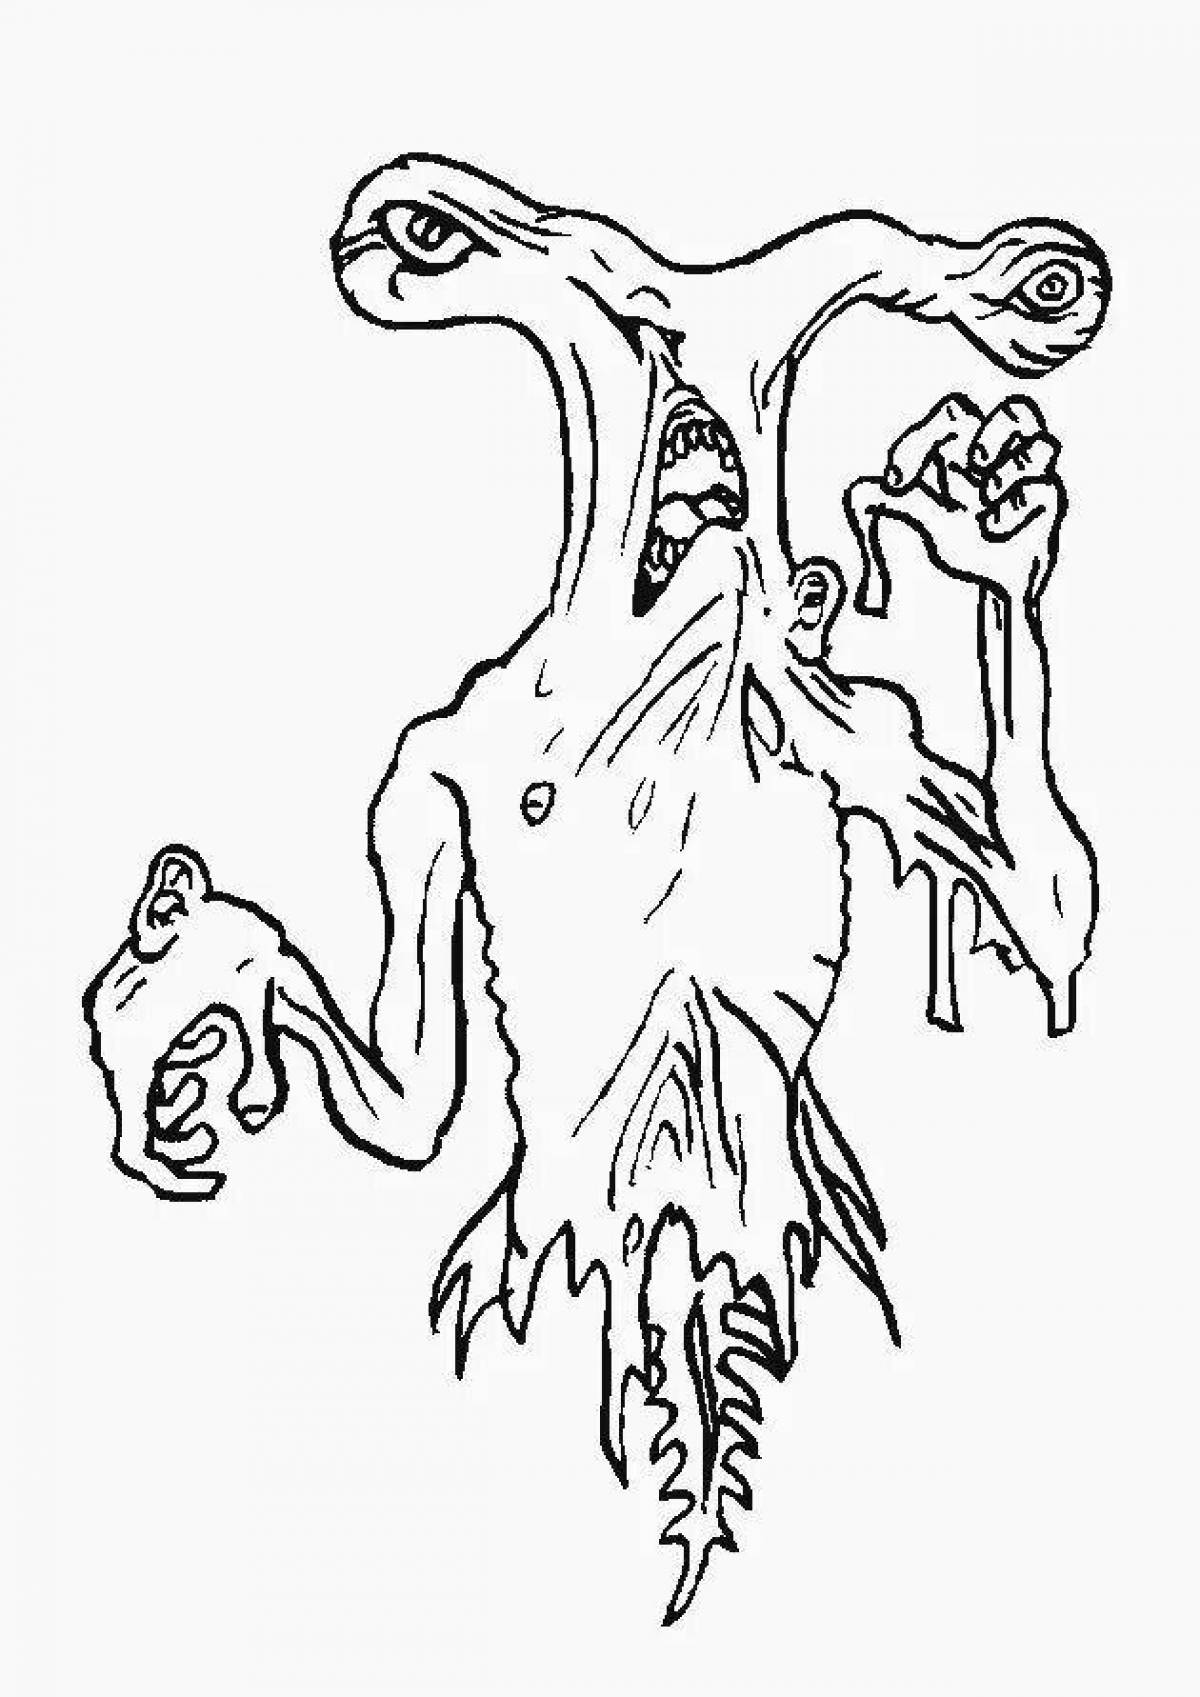 Alarm monster with siren head coloring page